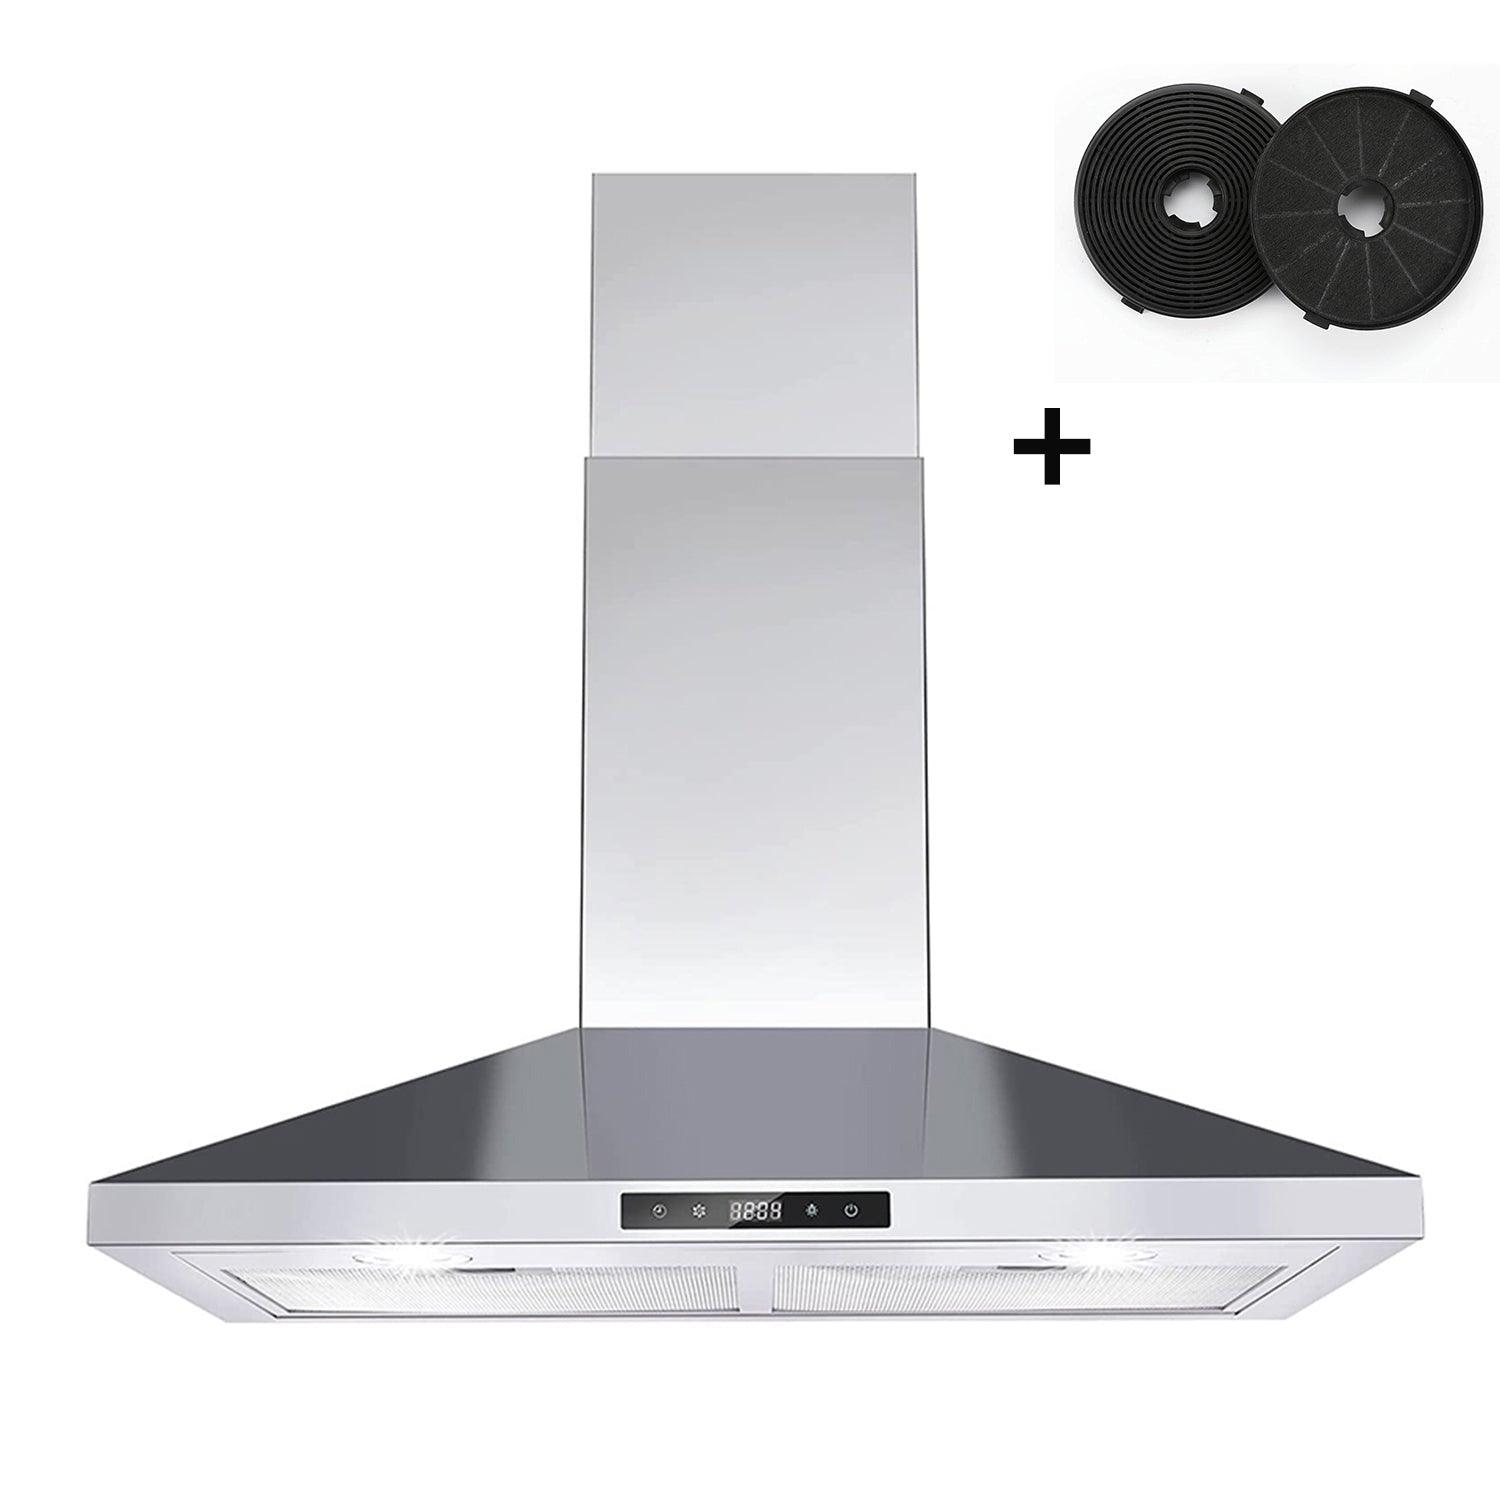 Range Hood 30 inch, Tieasy Wall Mount Kitchen Hood with Ducted/Ductless Convertible Duct, Stainless Steel Chimney and Baffle Filter, 3-Speed Push